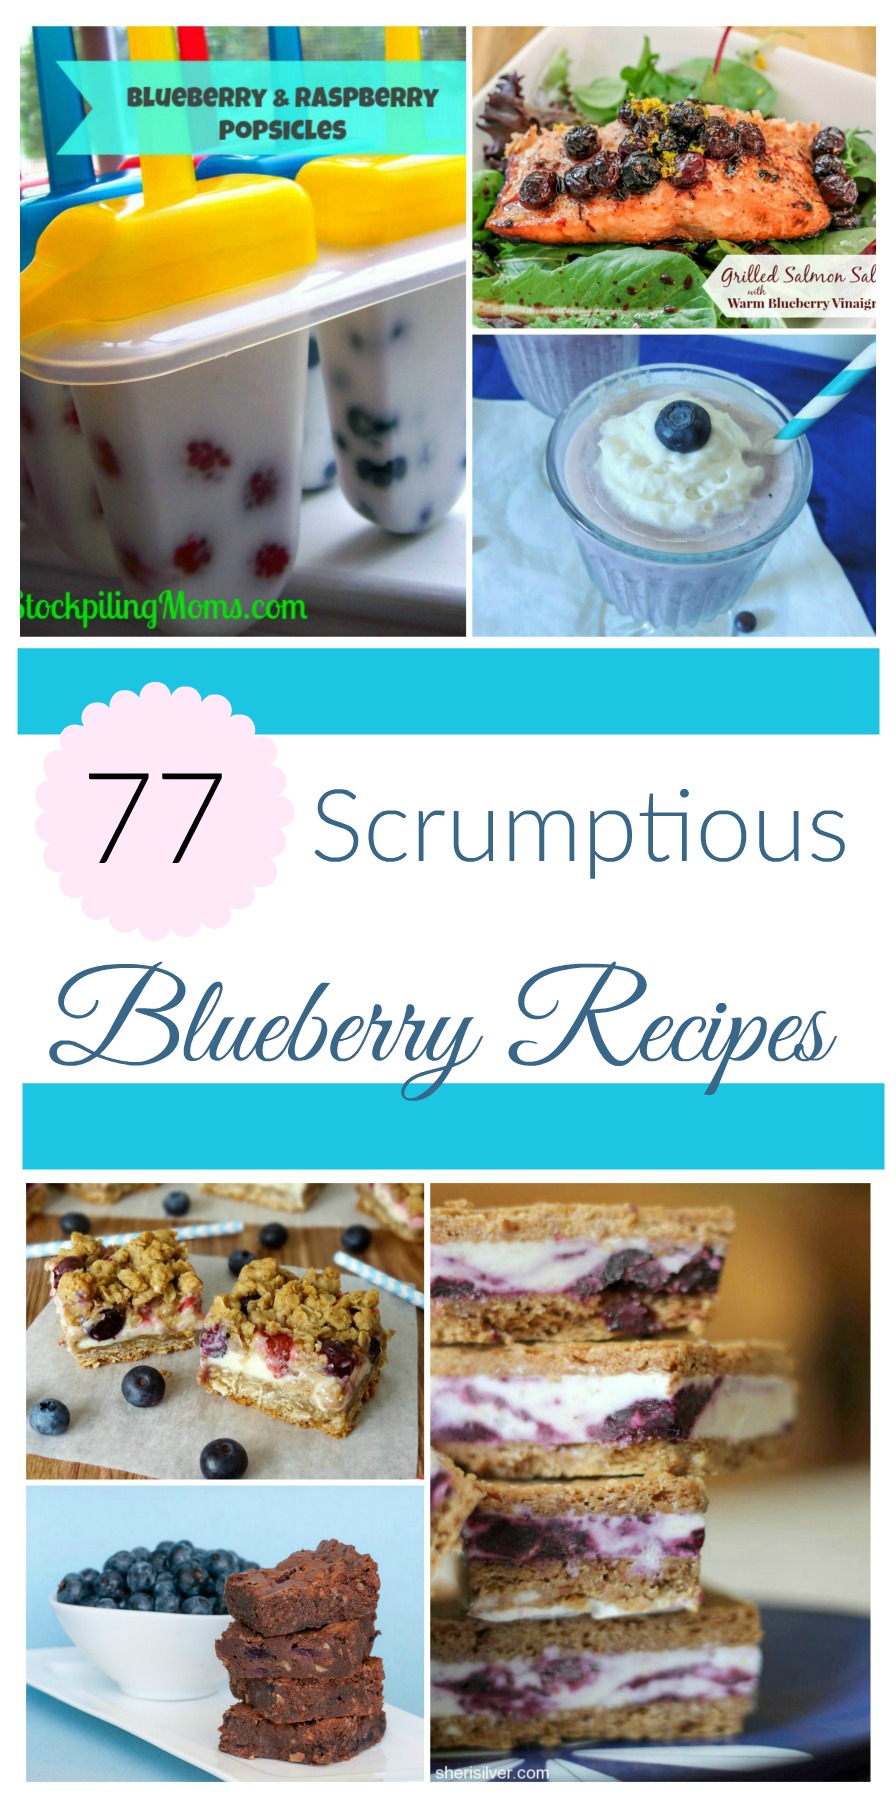 Looking for some delicious, homemade blueberry recipes? Check out our latest round up, featuring 77 Scrumptious Blueberry Recipes! 